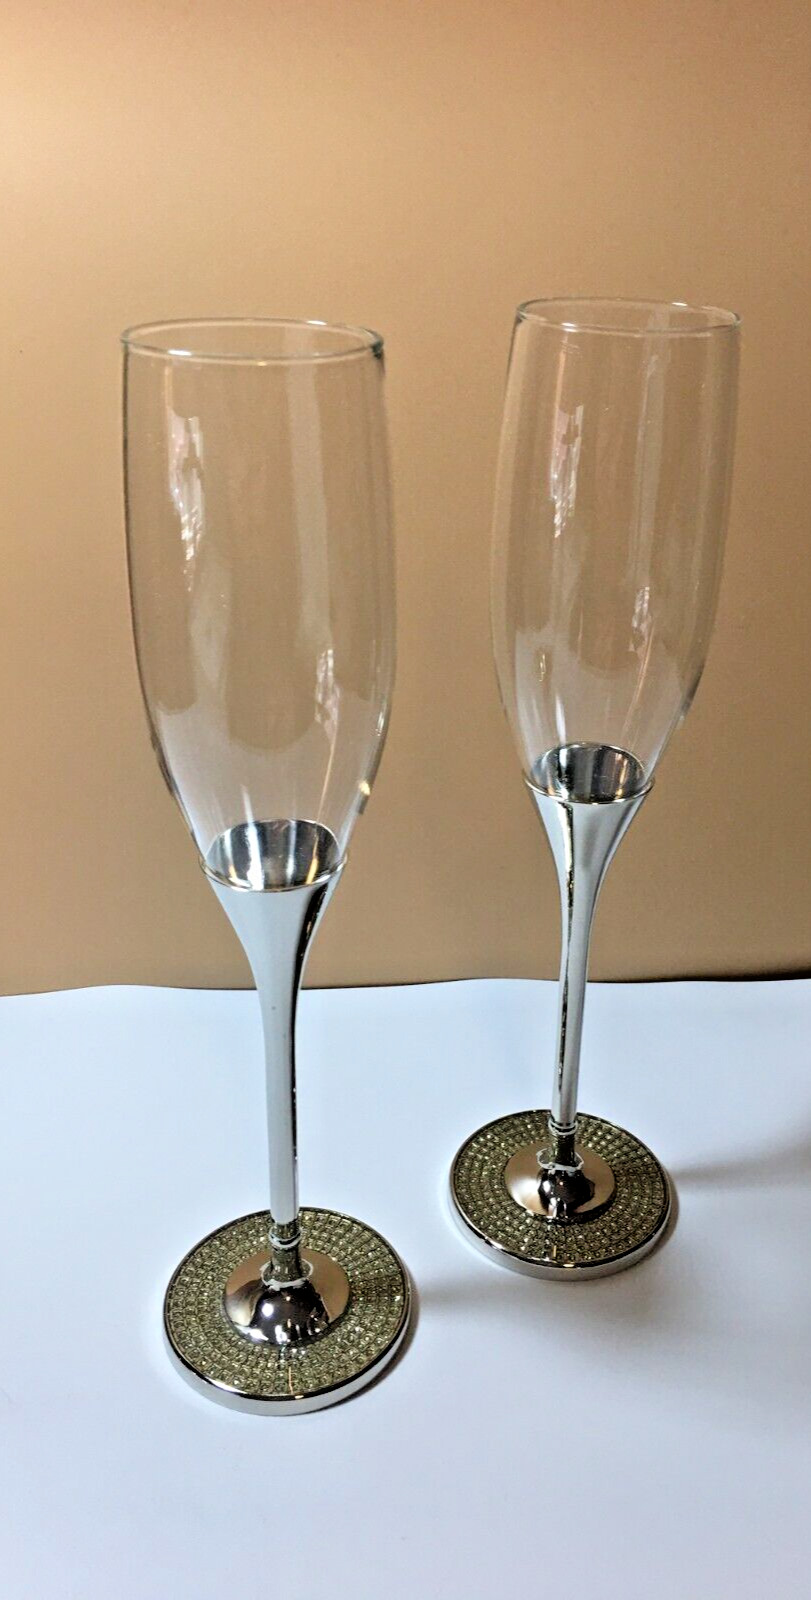 New Champagne Glasses - Silver Metal Stem Toasting Flutes  Pave Rhinestone Bases